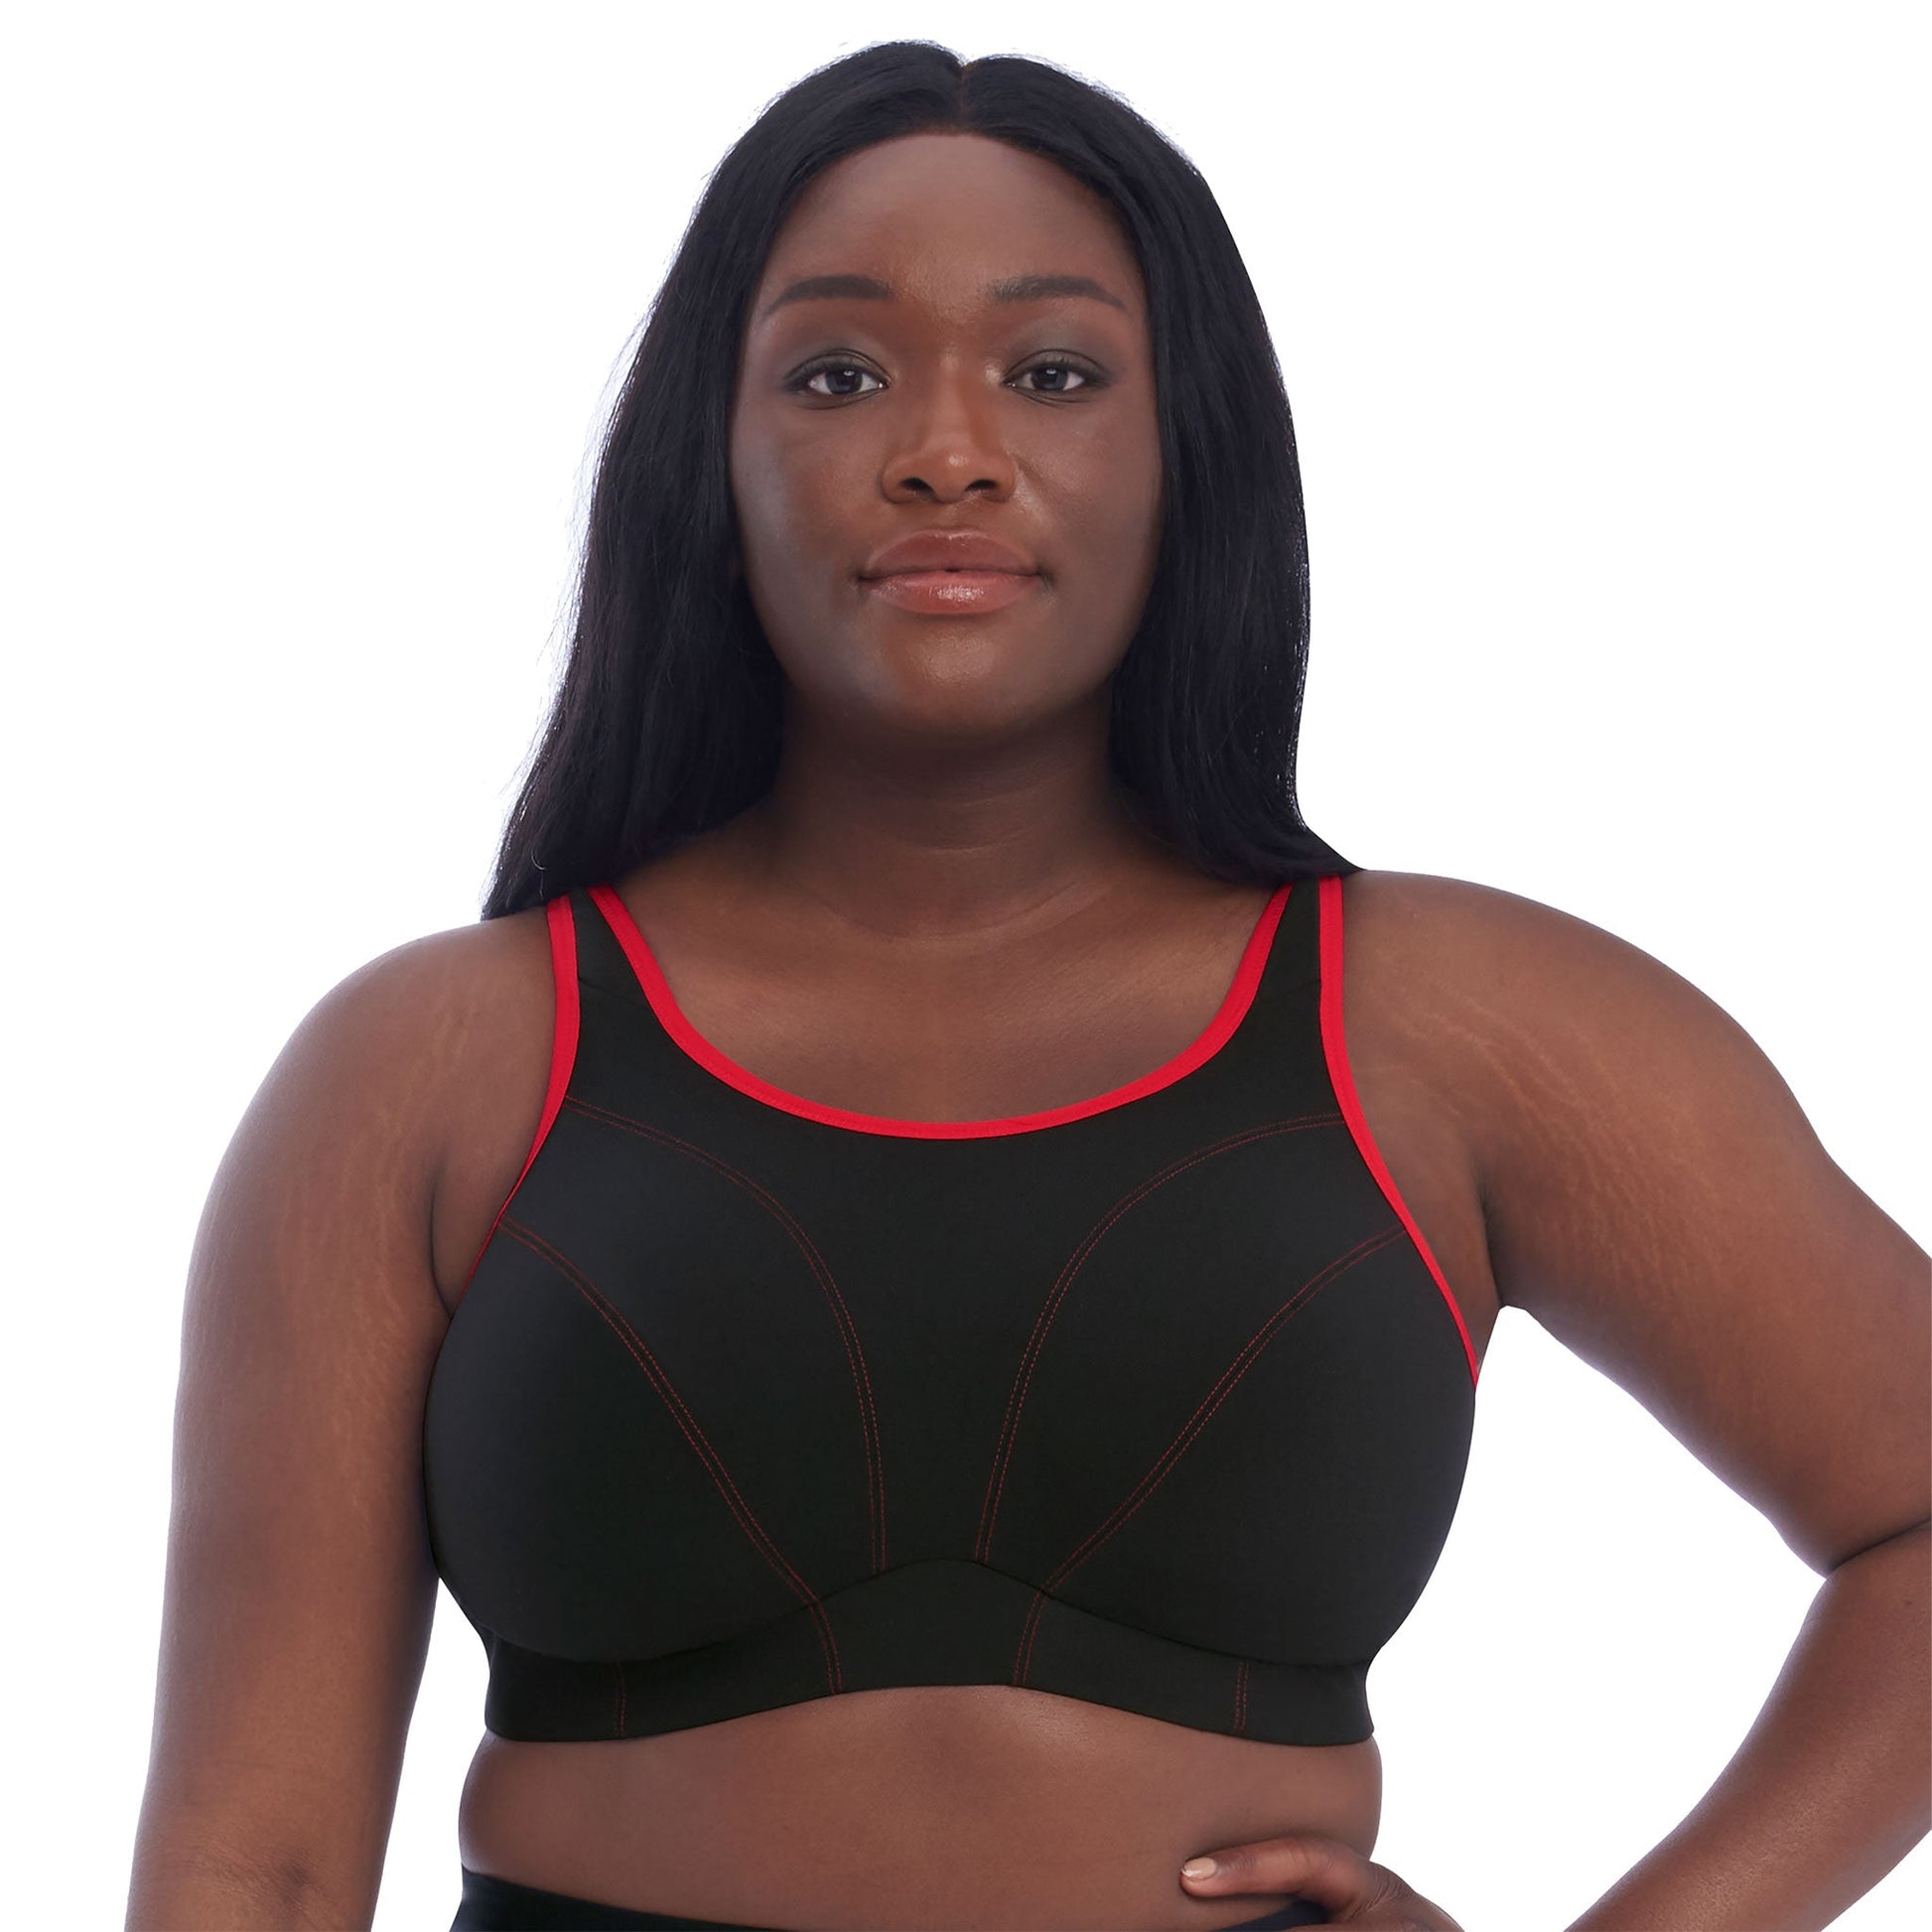 Non Wired Sports Bra - Black worn by model front view